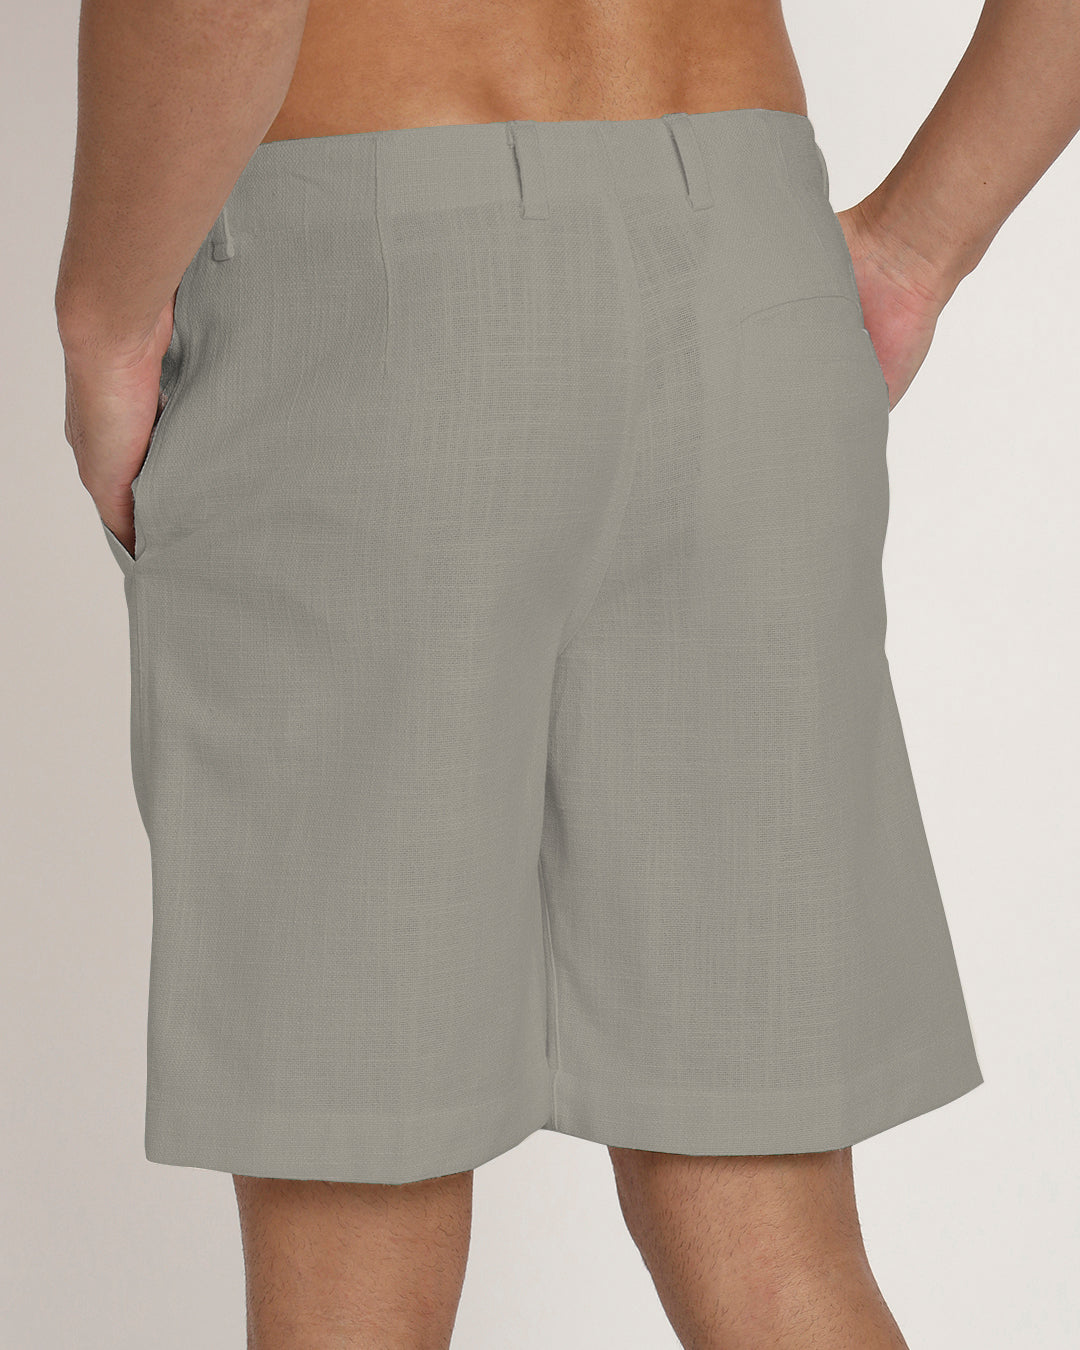 Ready For Anything Iced Grey Men's Shorts